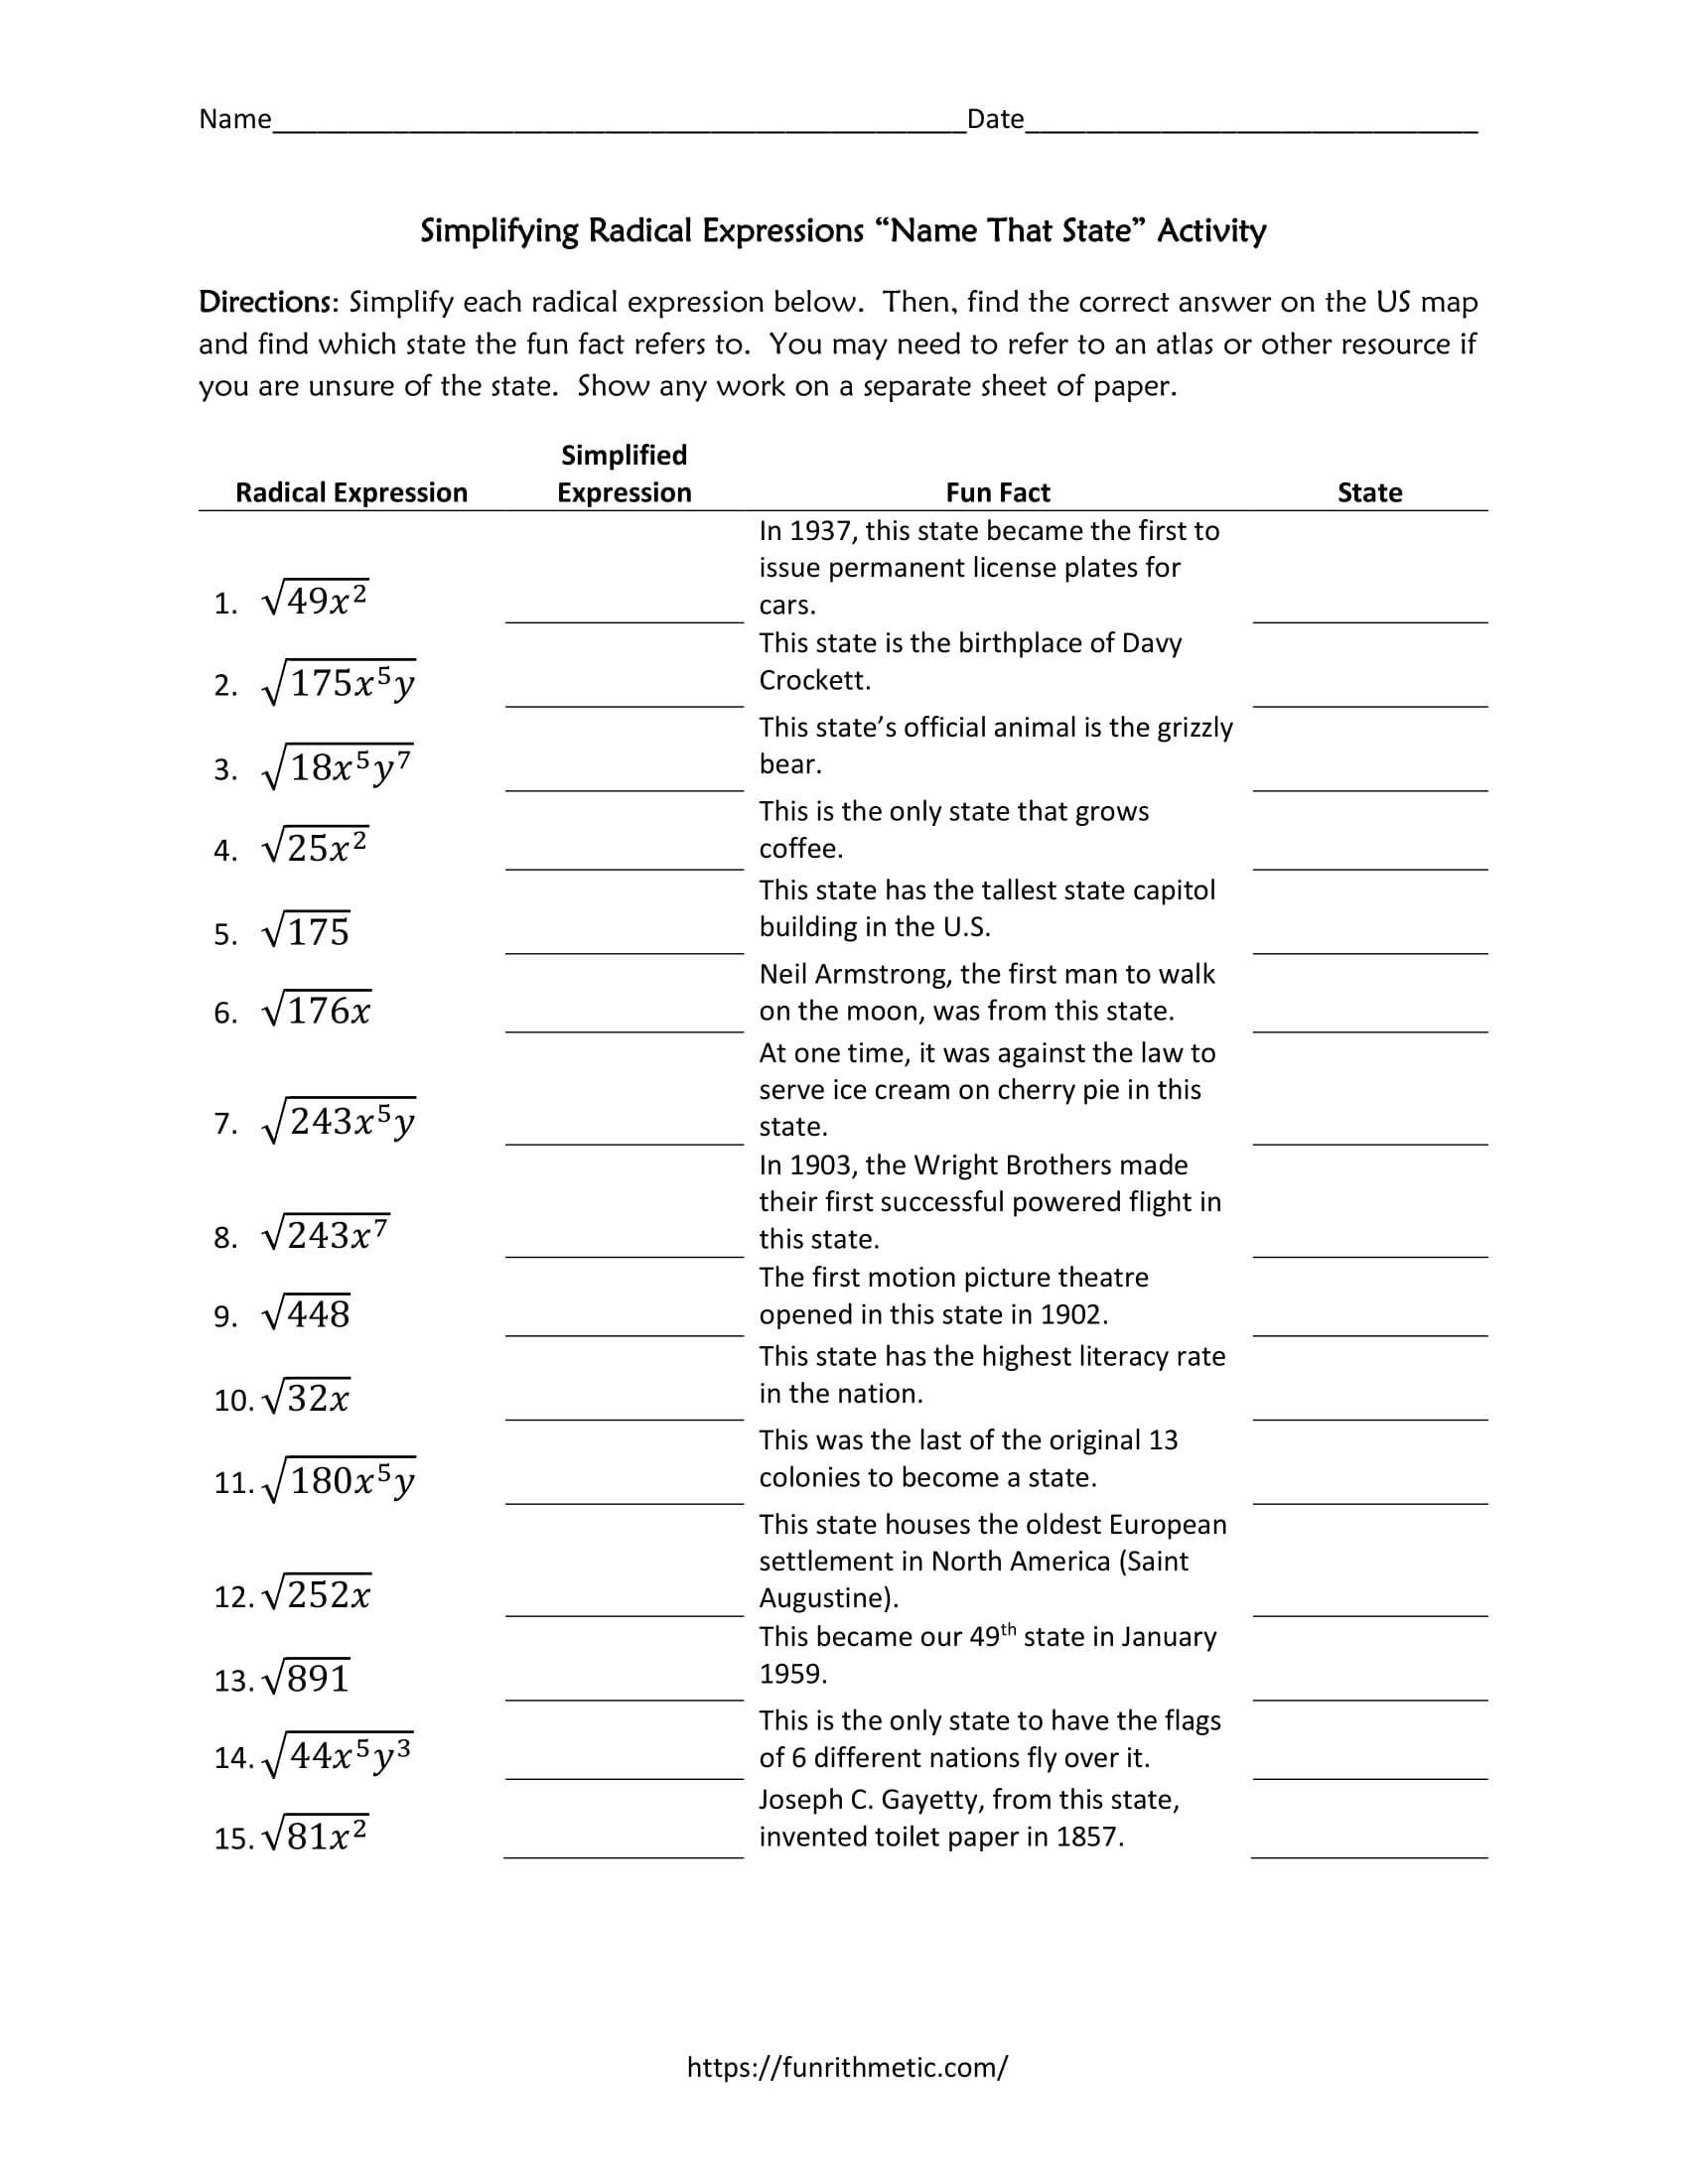 Simplifying Radicals Worksheet Answer Key Simplifying Radical Expressions &quot;name that State&quot; Cross